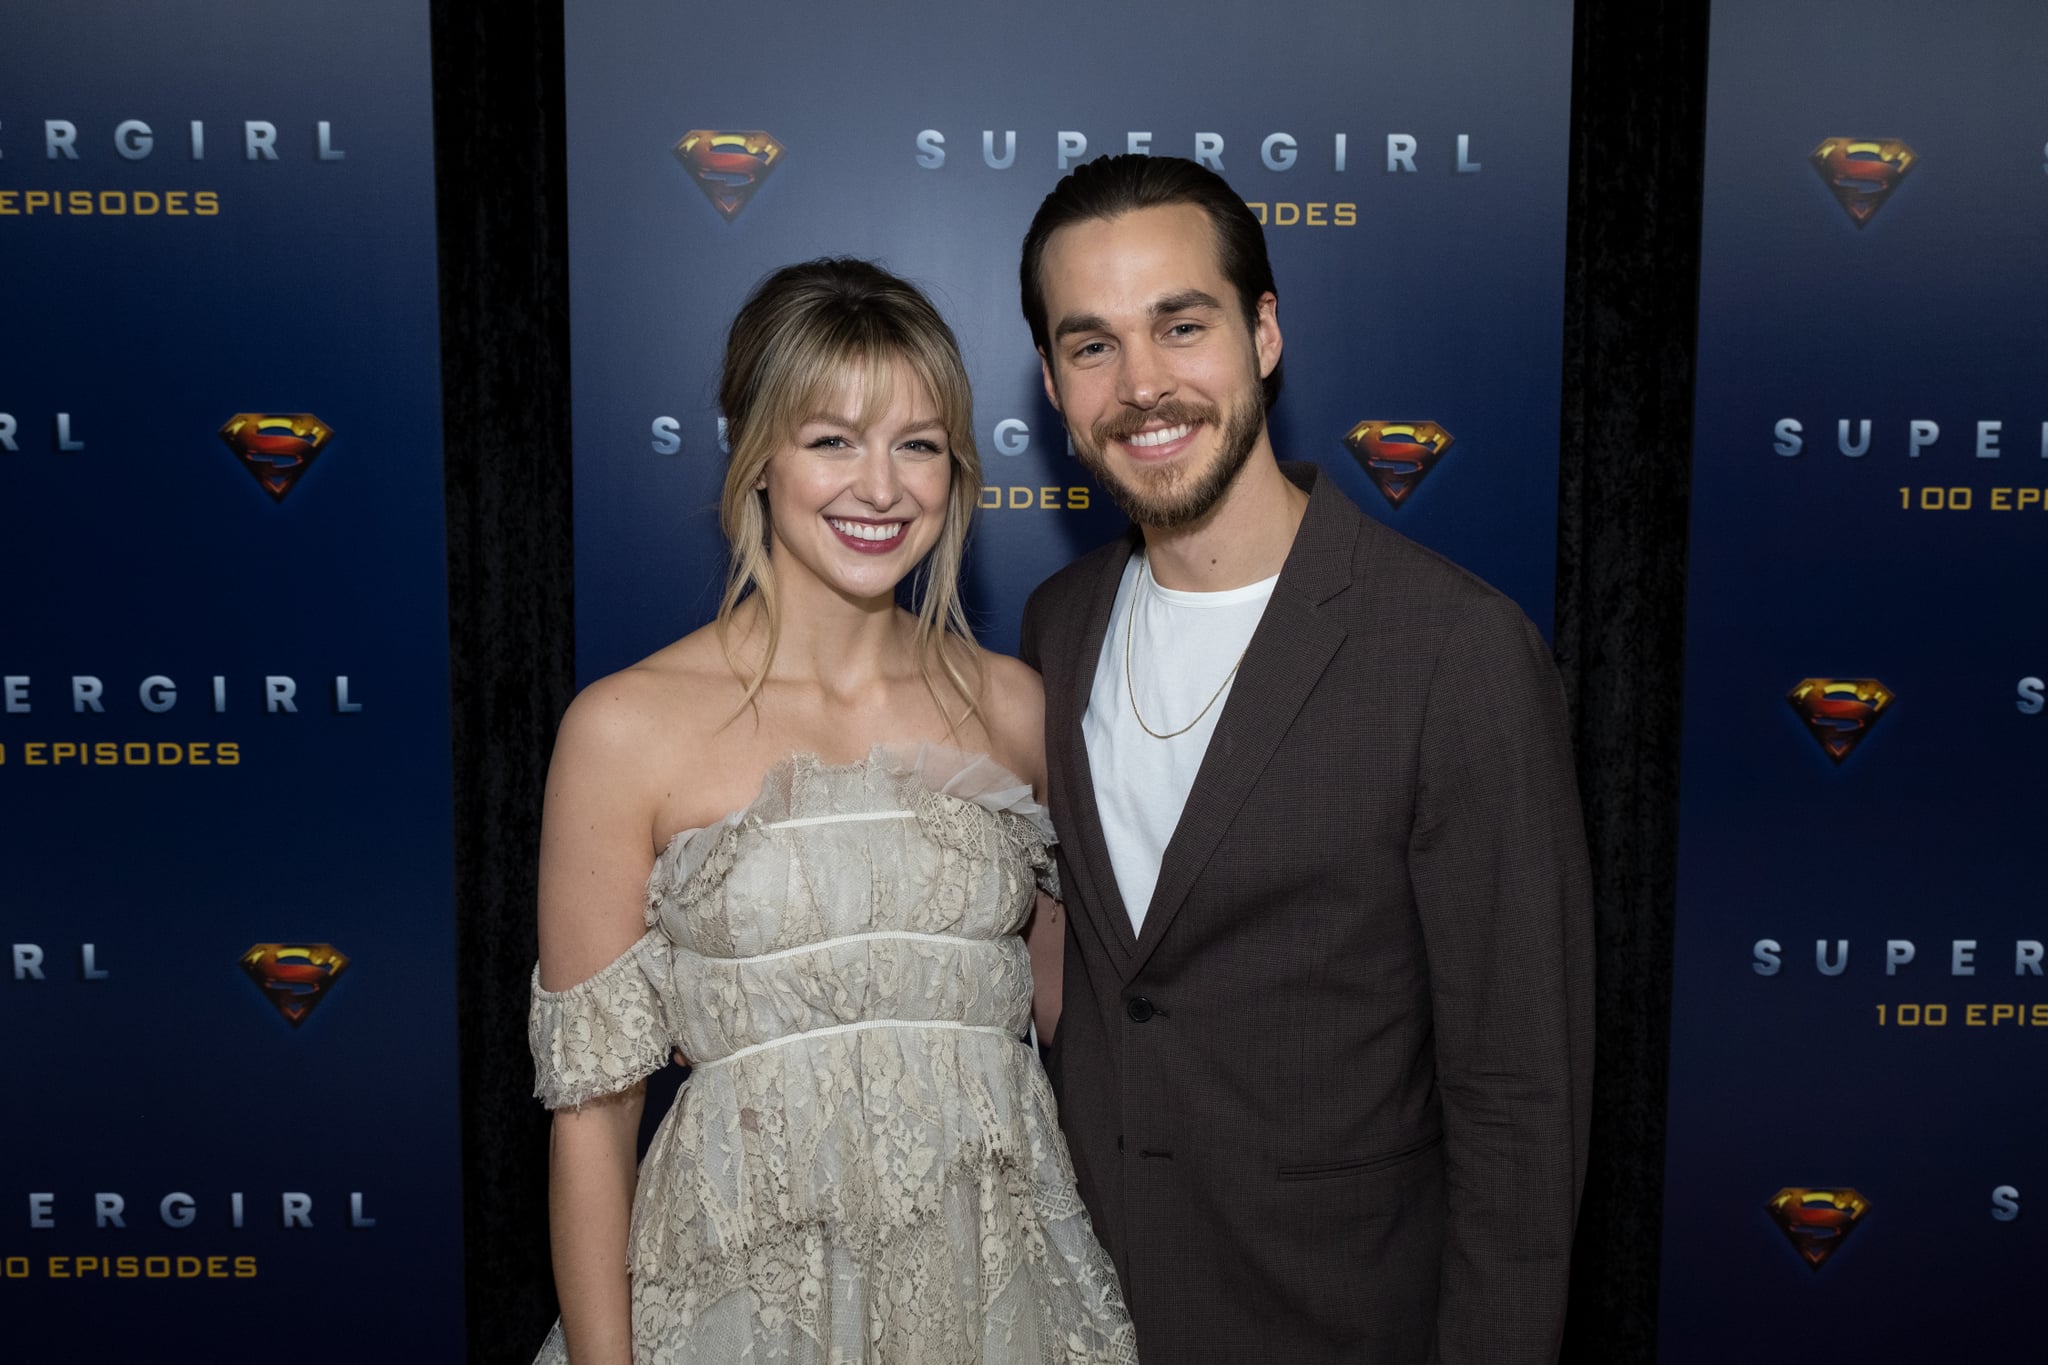 VANCOUVER, BC - DECEMBER 14: (L-R) Supergirl star Melissa Benoist and actor Chris Wood attend the red carpet for the shows 100th episode celebration at the Fairmont Pacific Rim Hotel on December 14, 2019 in Vancouver, Canada. (Photo by Phillip Chin/Getty Images for Warner Brothers Television)